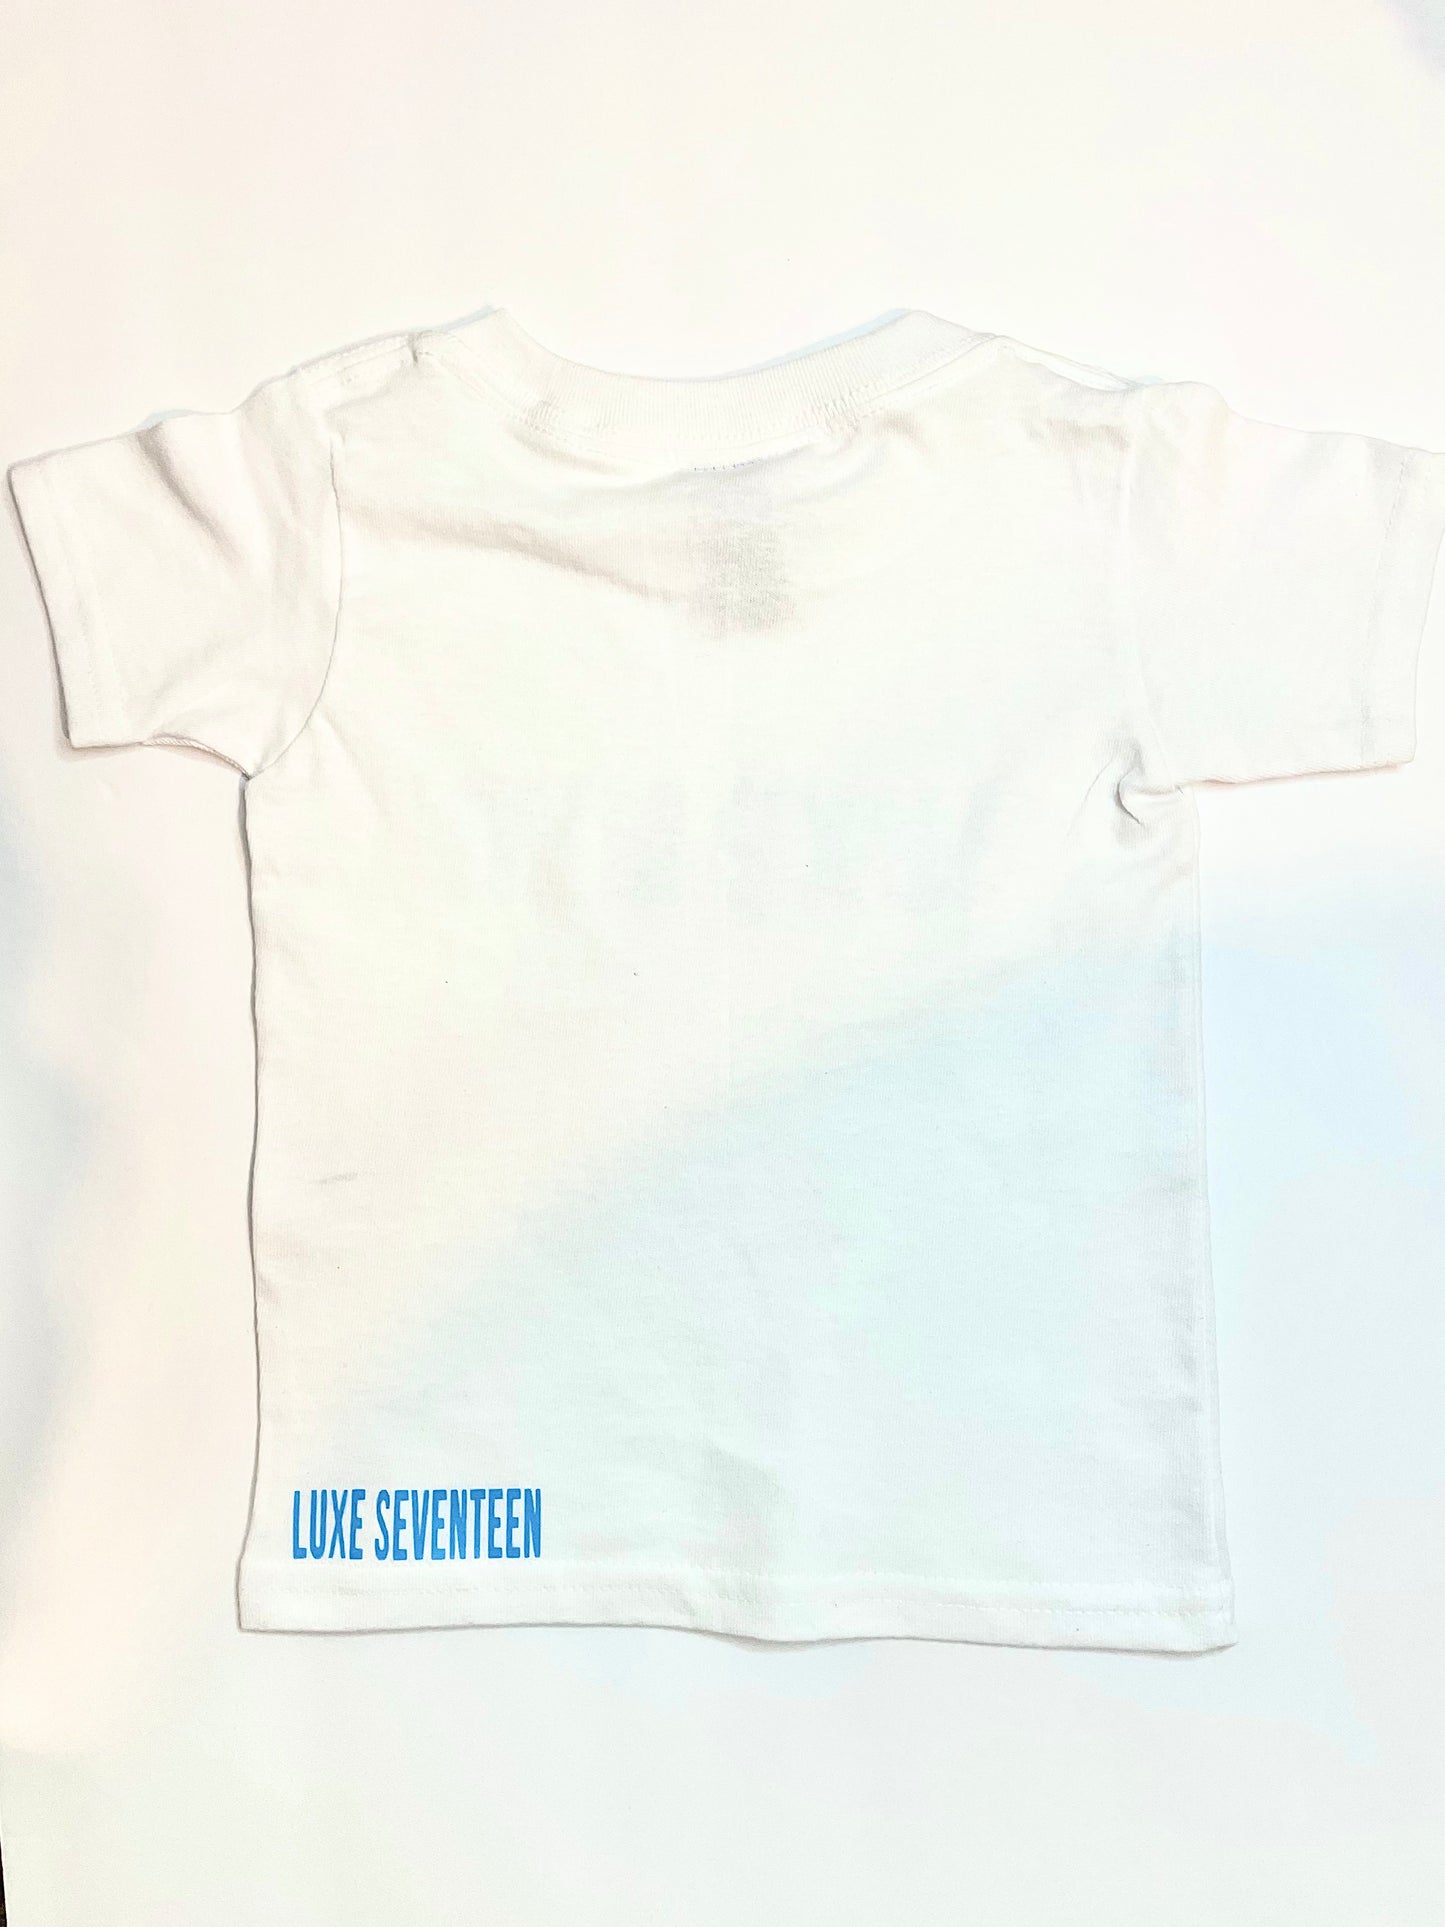 Luxe Mini youth/toddler tees